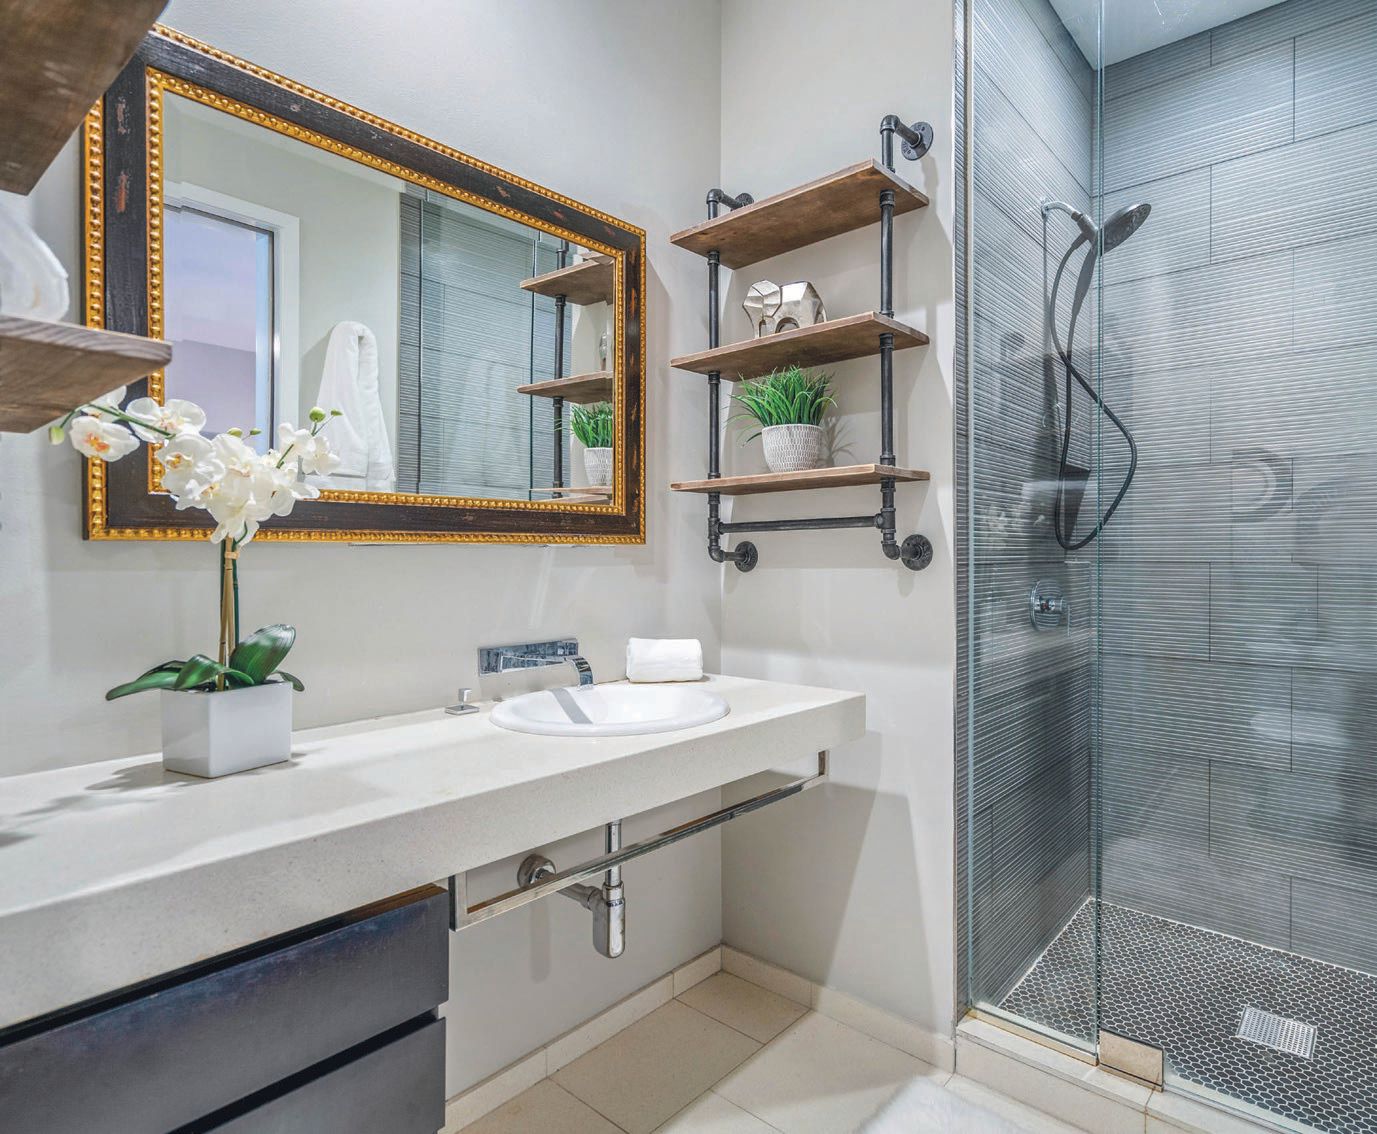 Primary suite bathroom with frameless glass shower PHOTO BY JOSHUA BARTOLOTTI